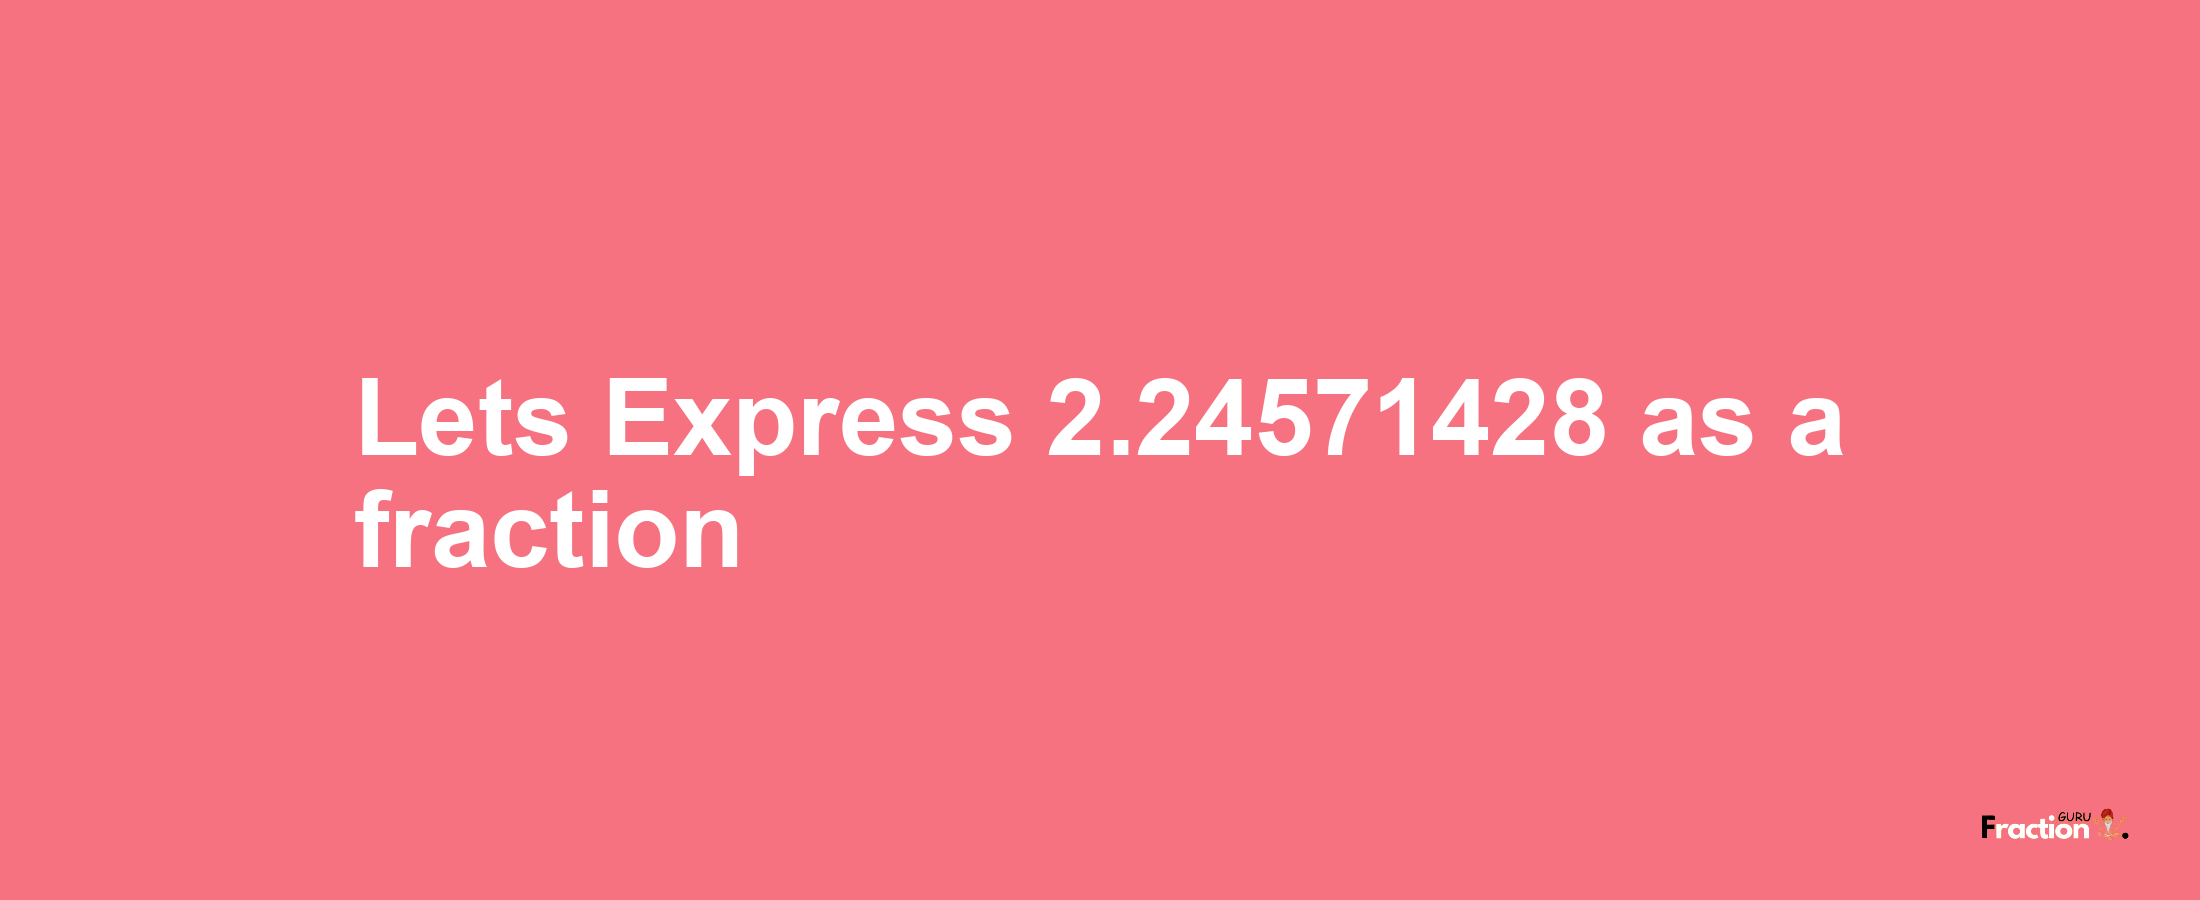 Lets Express 2.24571428 as afraction